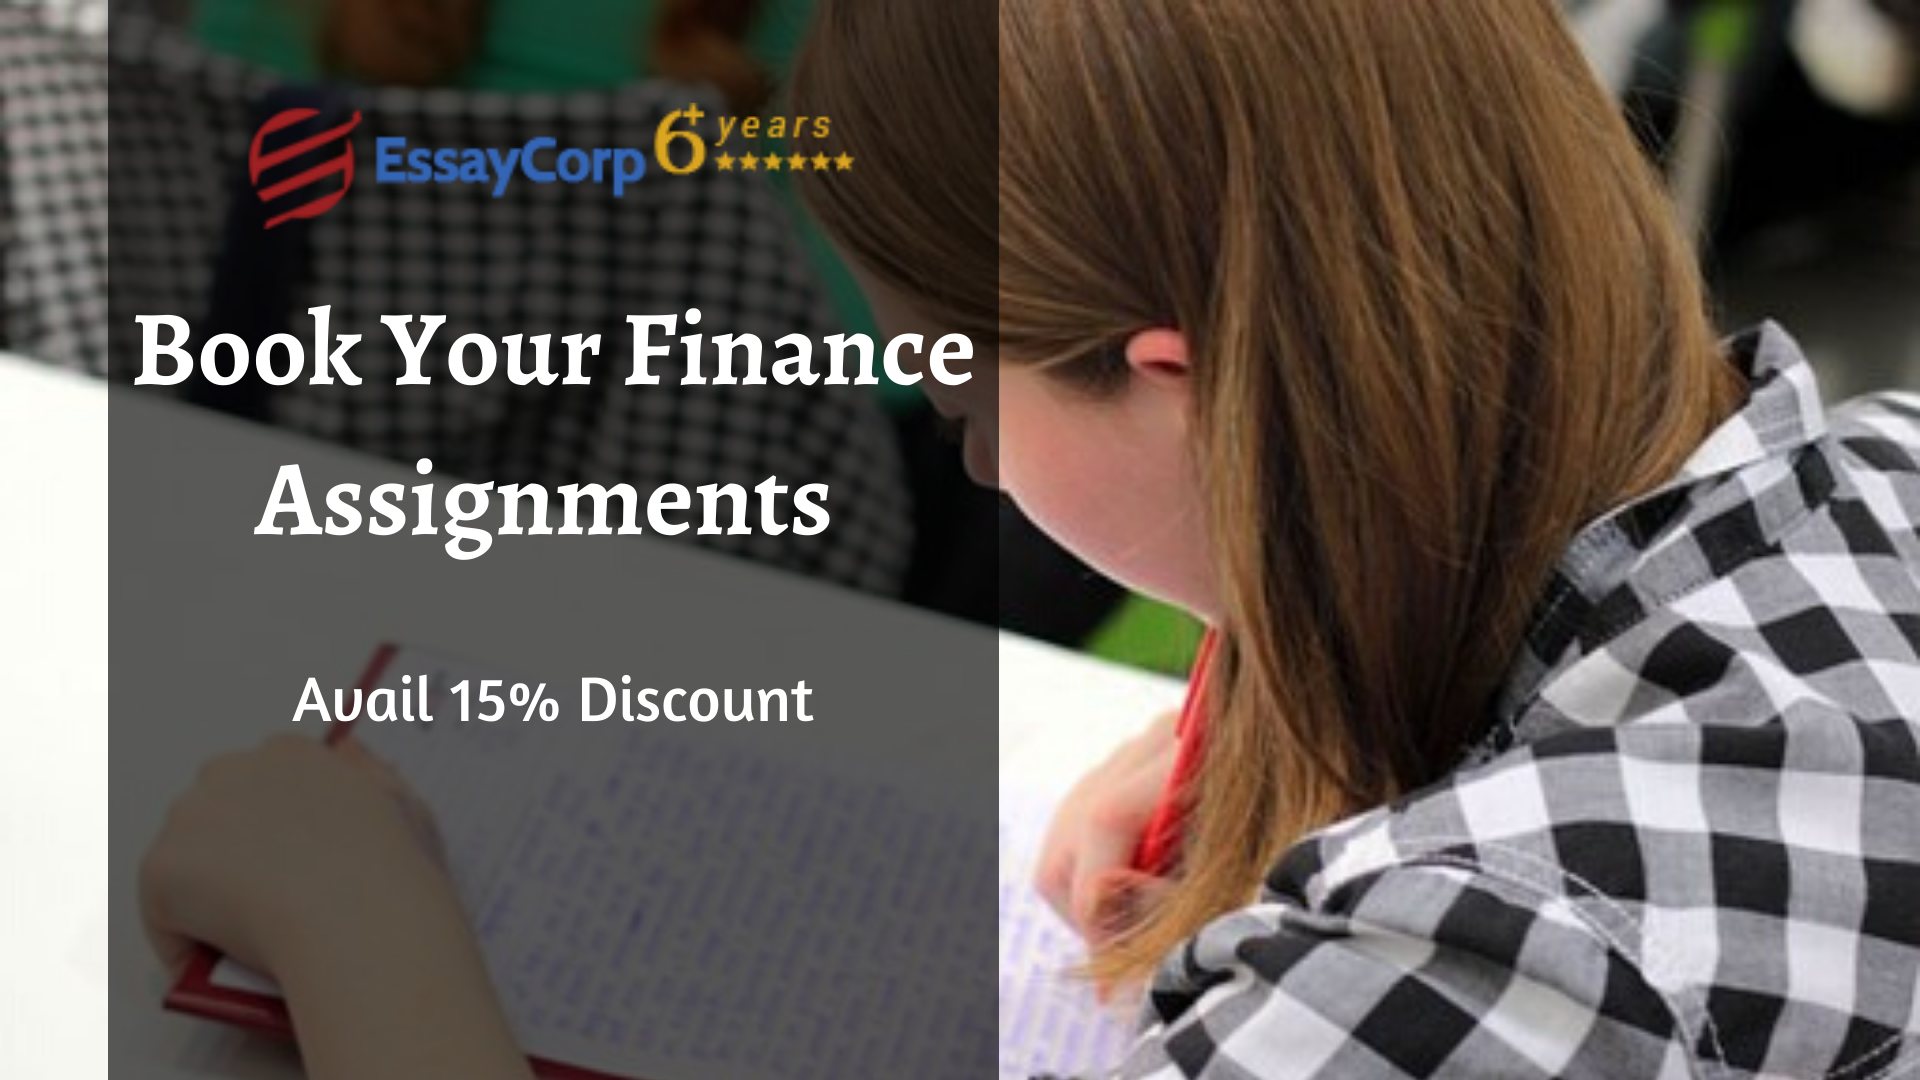 Book Your Finance Assignments | Avail 15% Discount